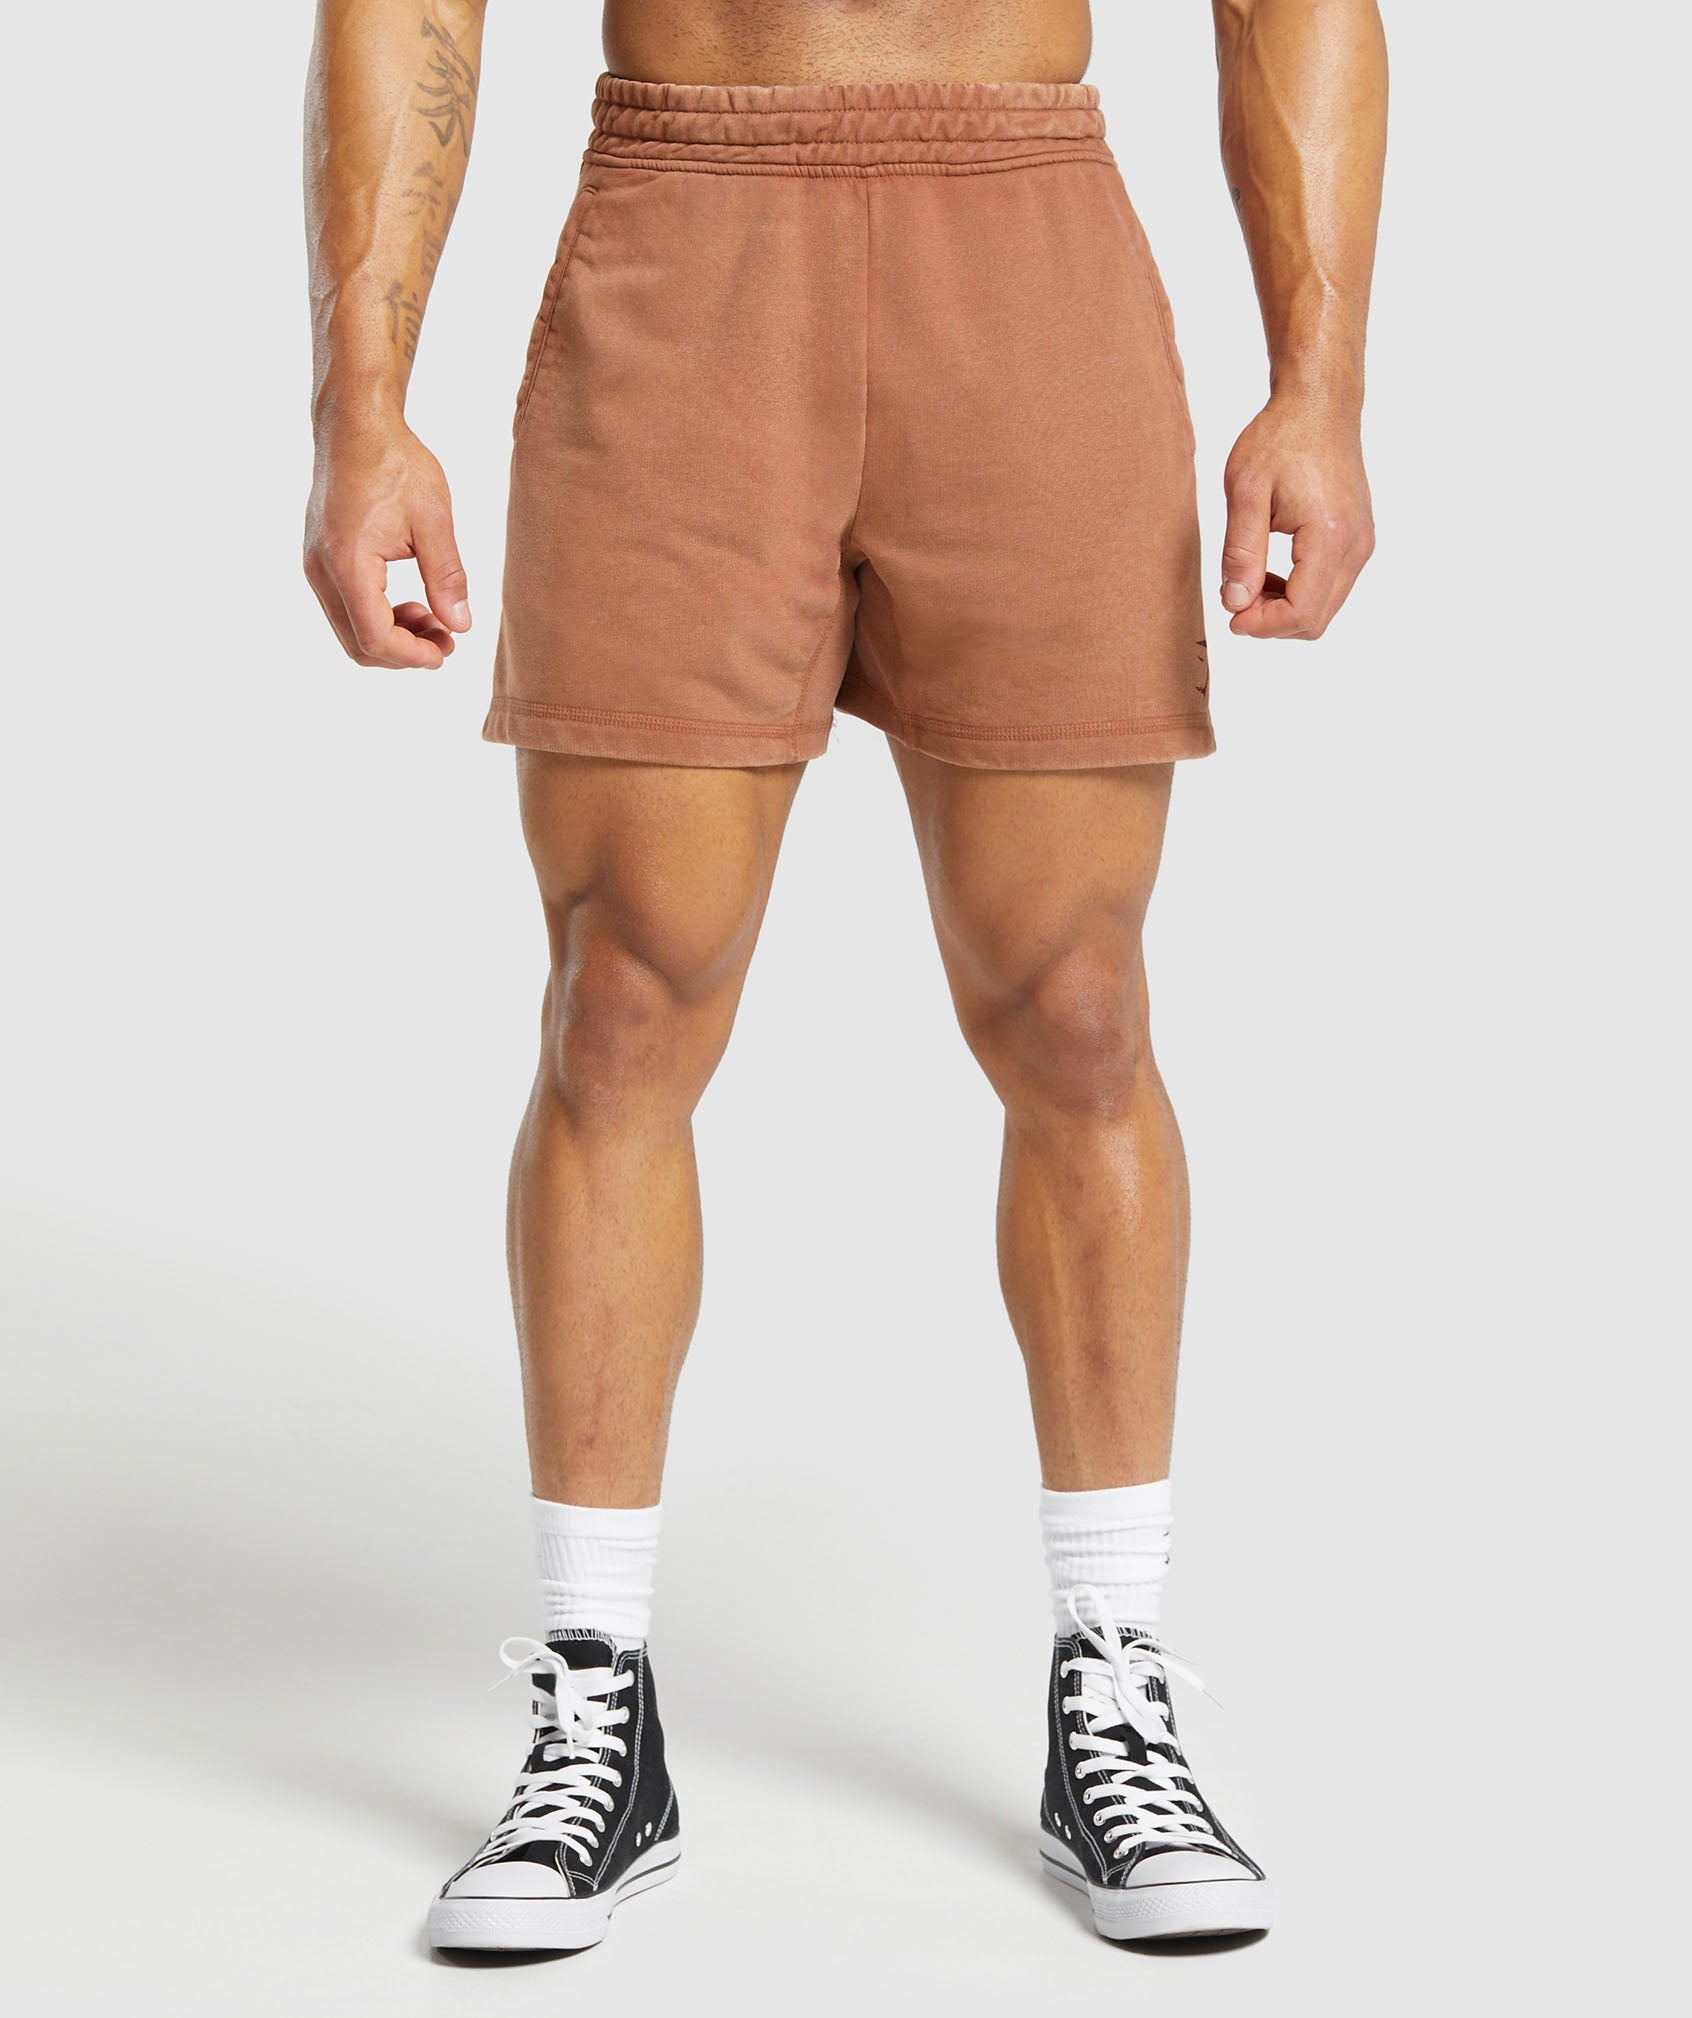 Power Washed 5" Shorts in Canyon Brown - view 1